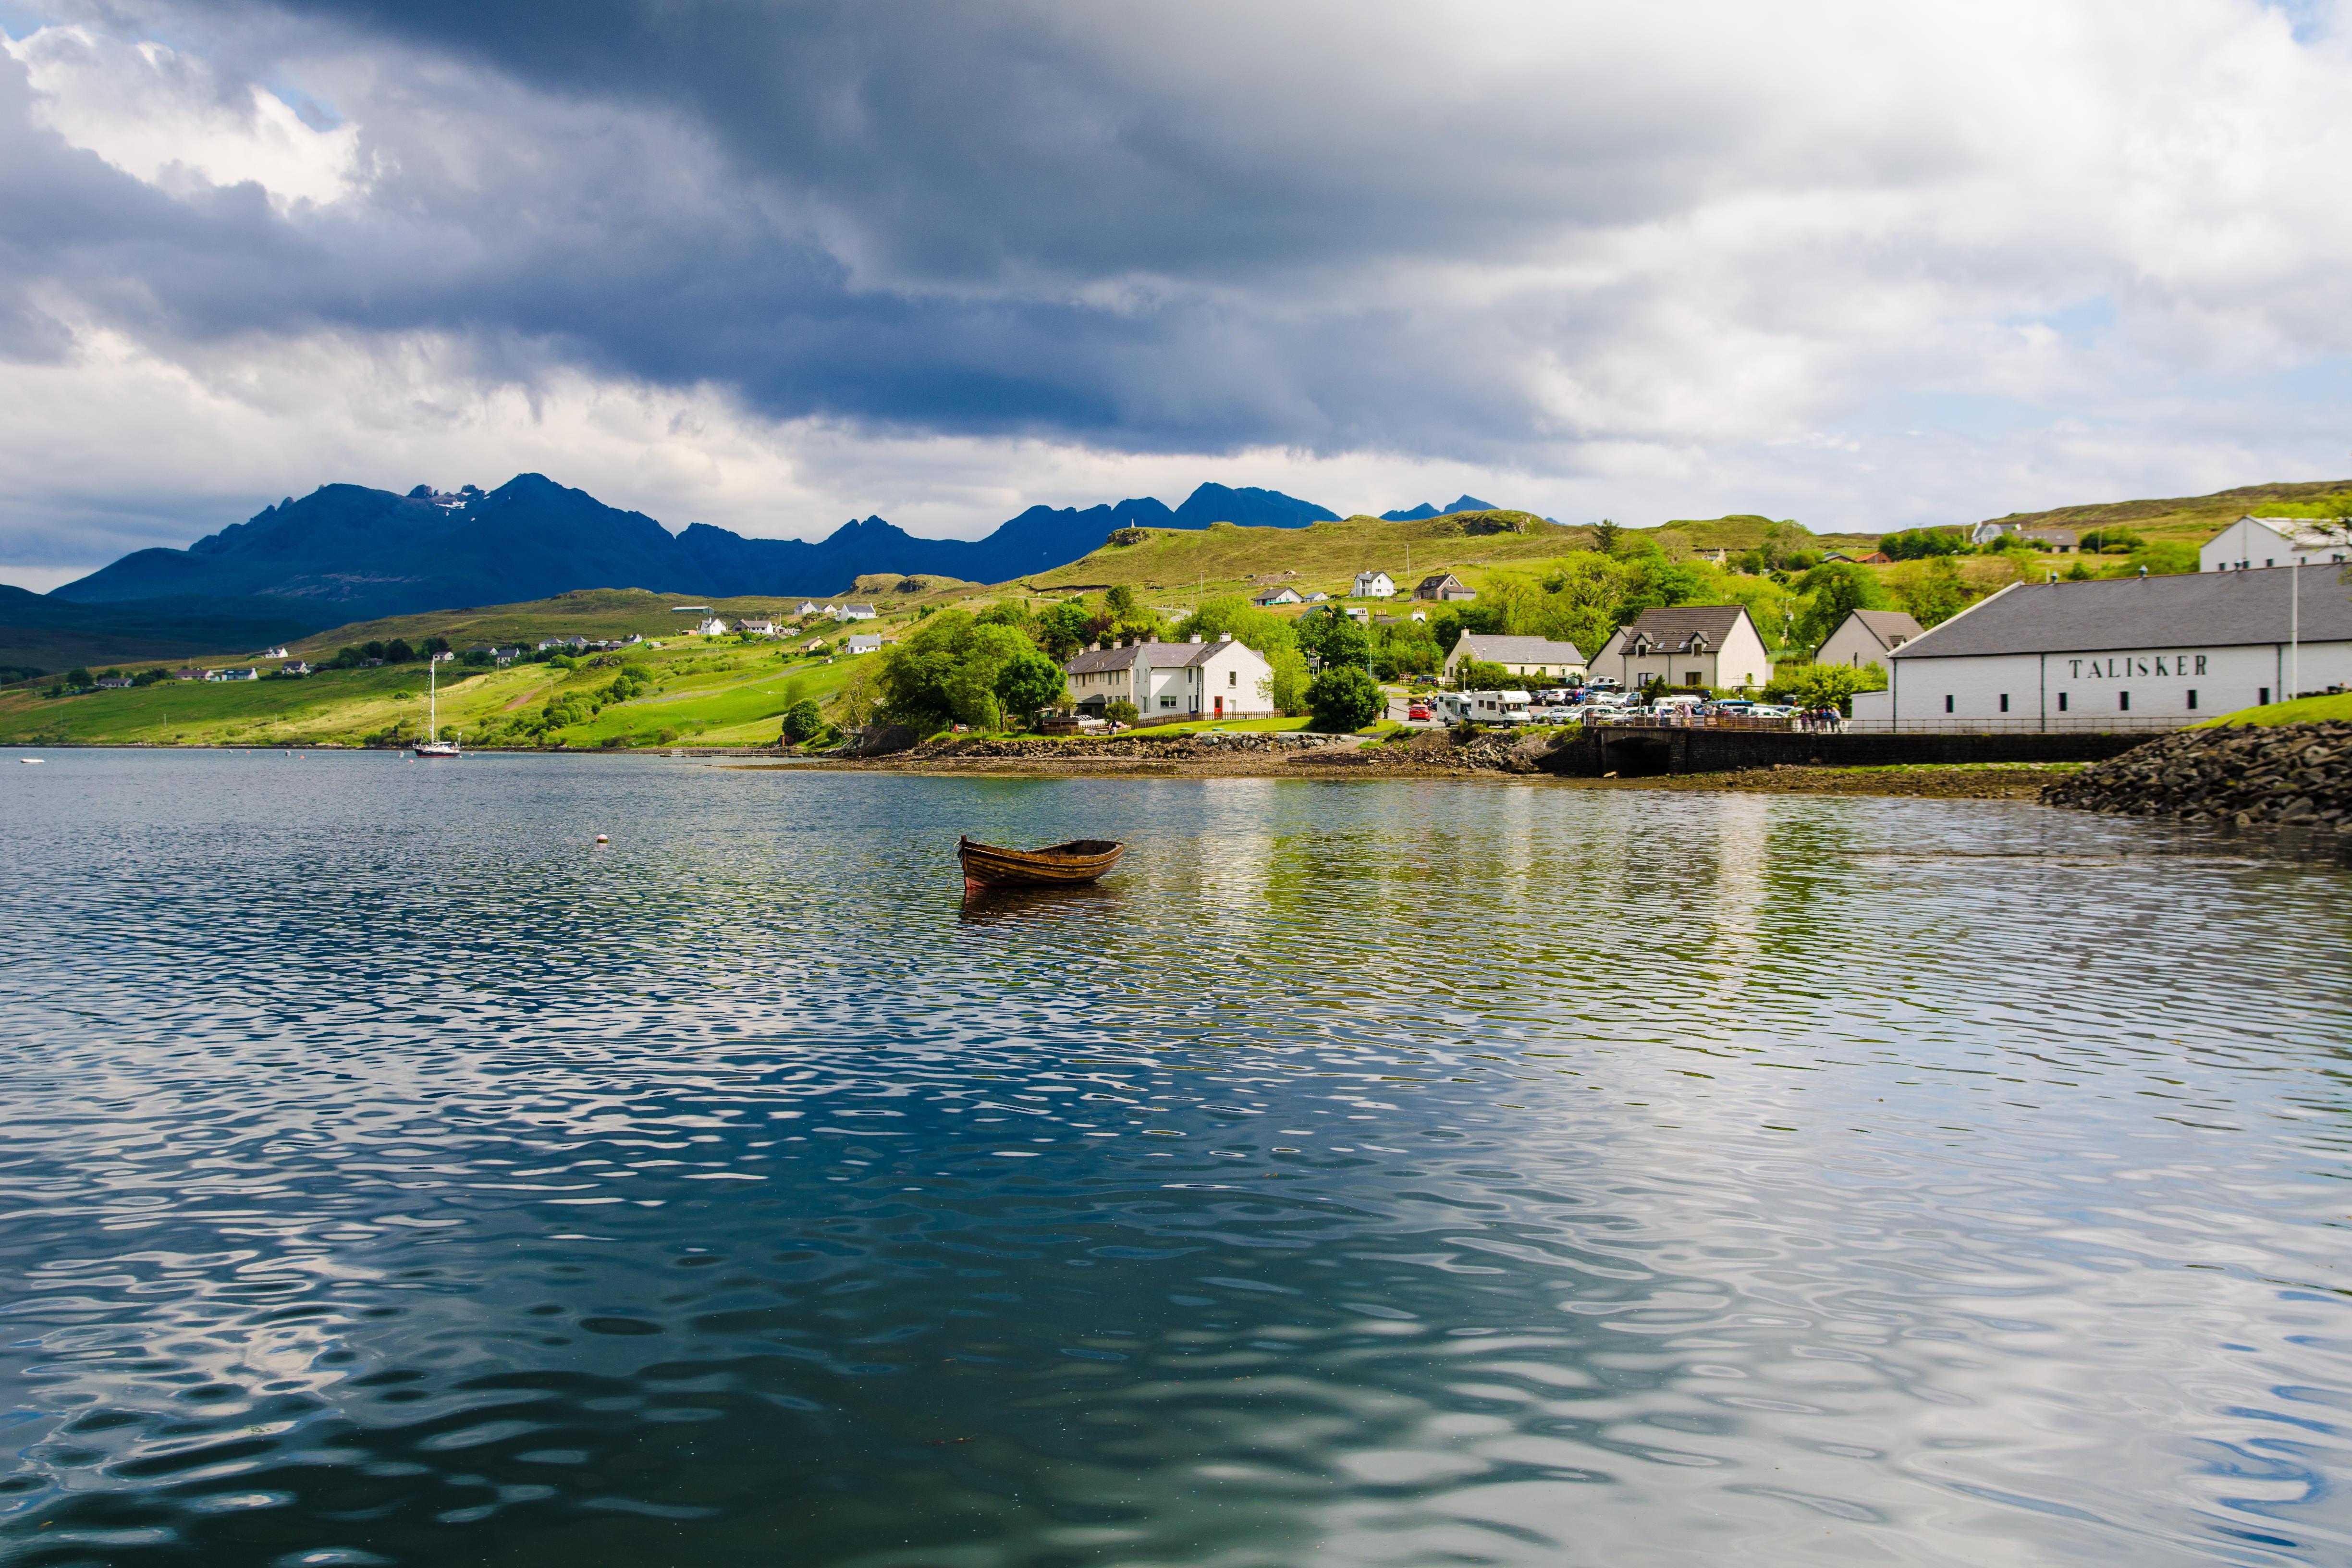 Talisker distillery and the Black Cuillin Mountains, Isle of Skye